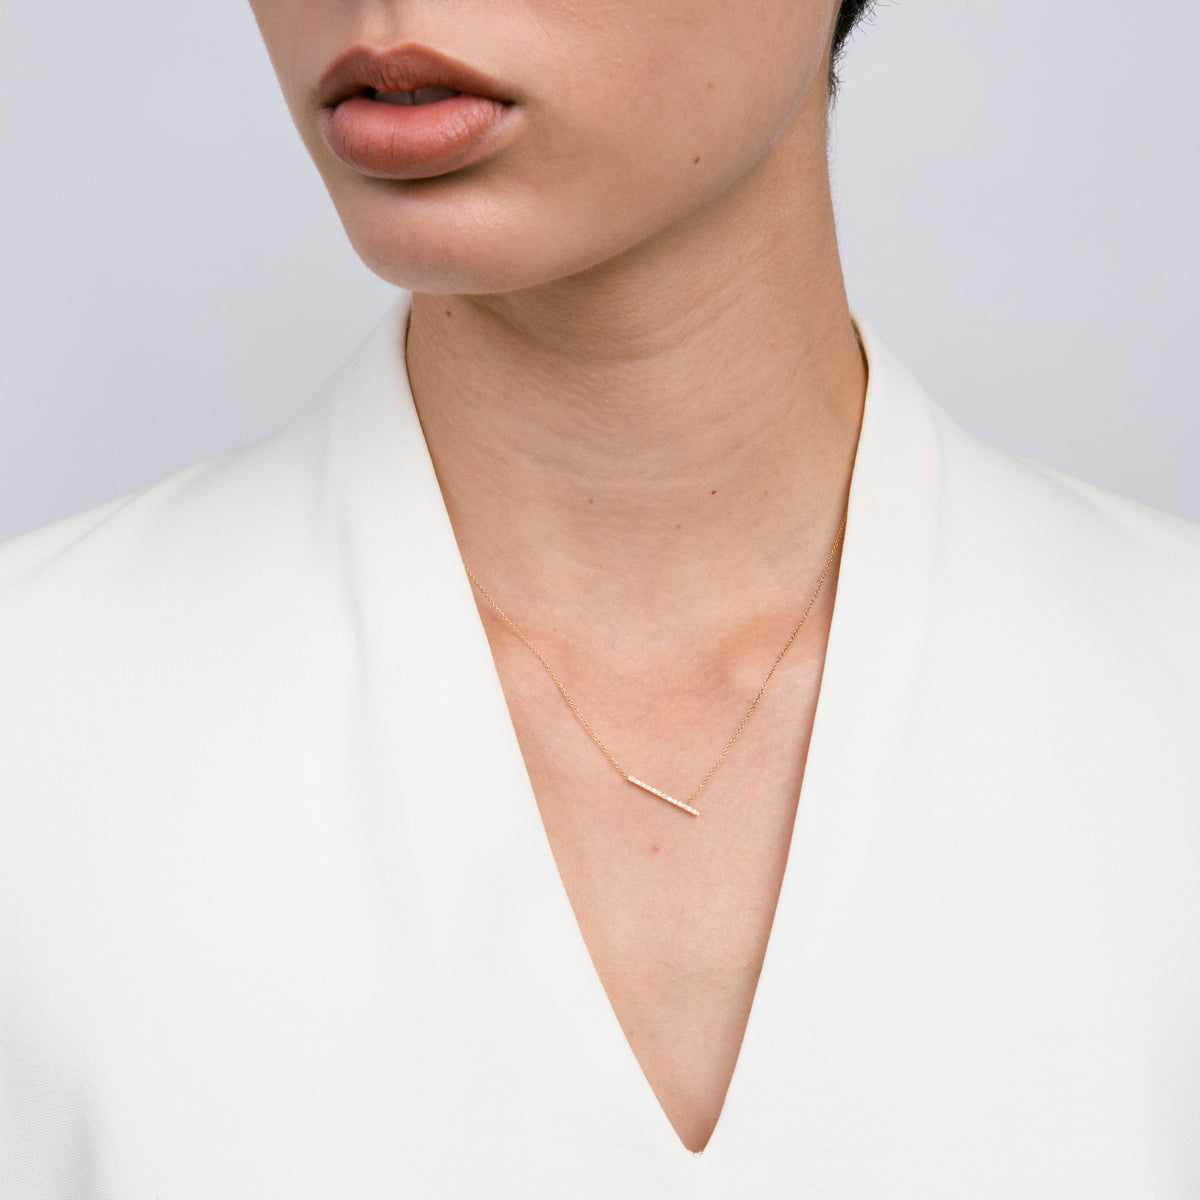 Tira Unconventional Necklace in 14k Gold set with White Diamonds By SHW Fine Jewelry NYC